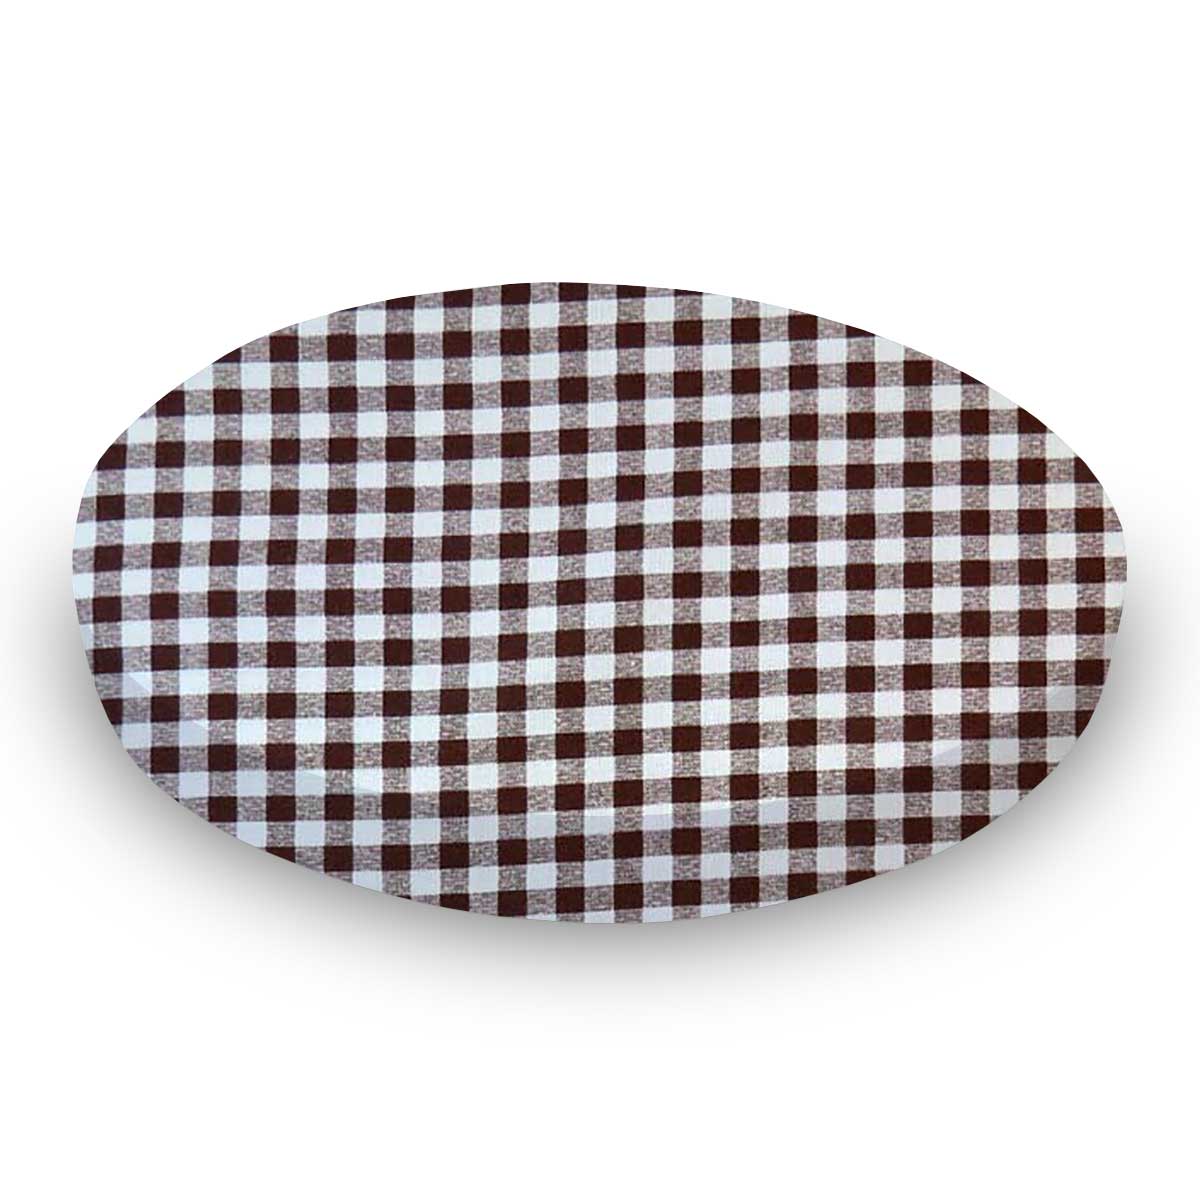 Oval Crib (Stokke Sleepi) - Brown Gingham Check - Fitted  Oval